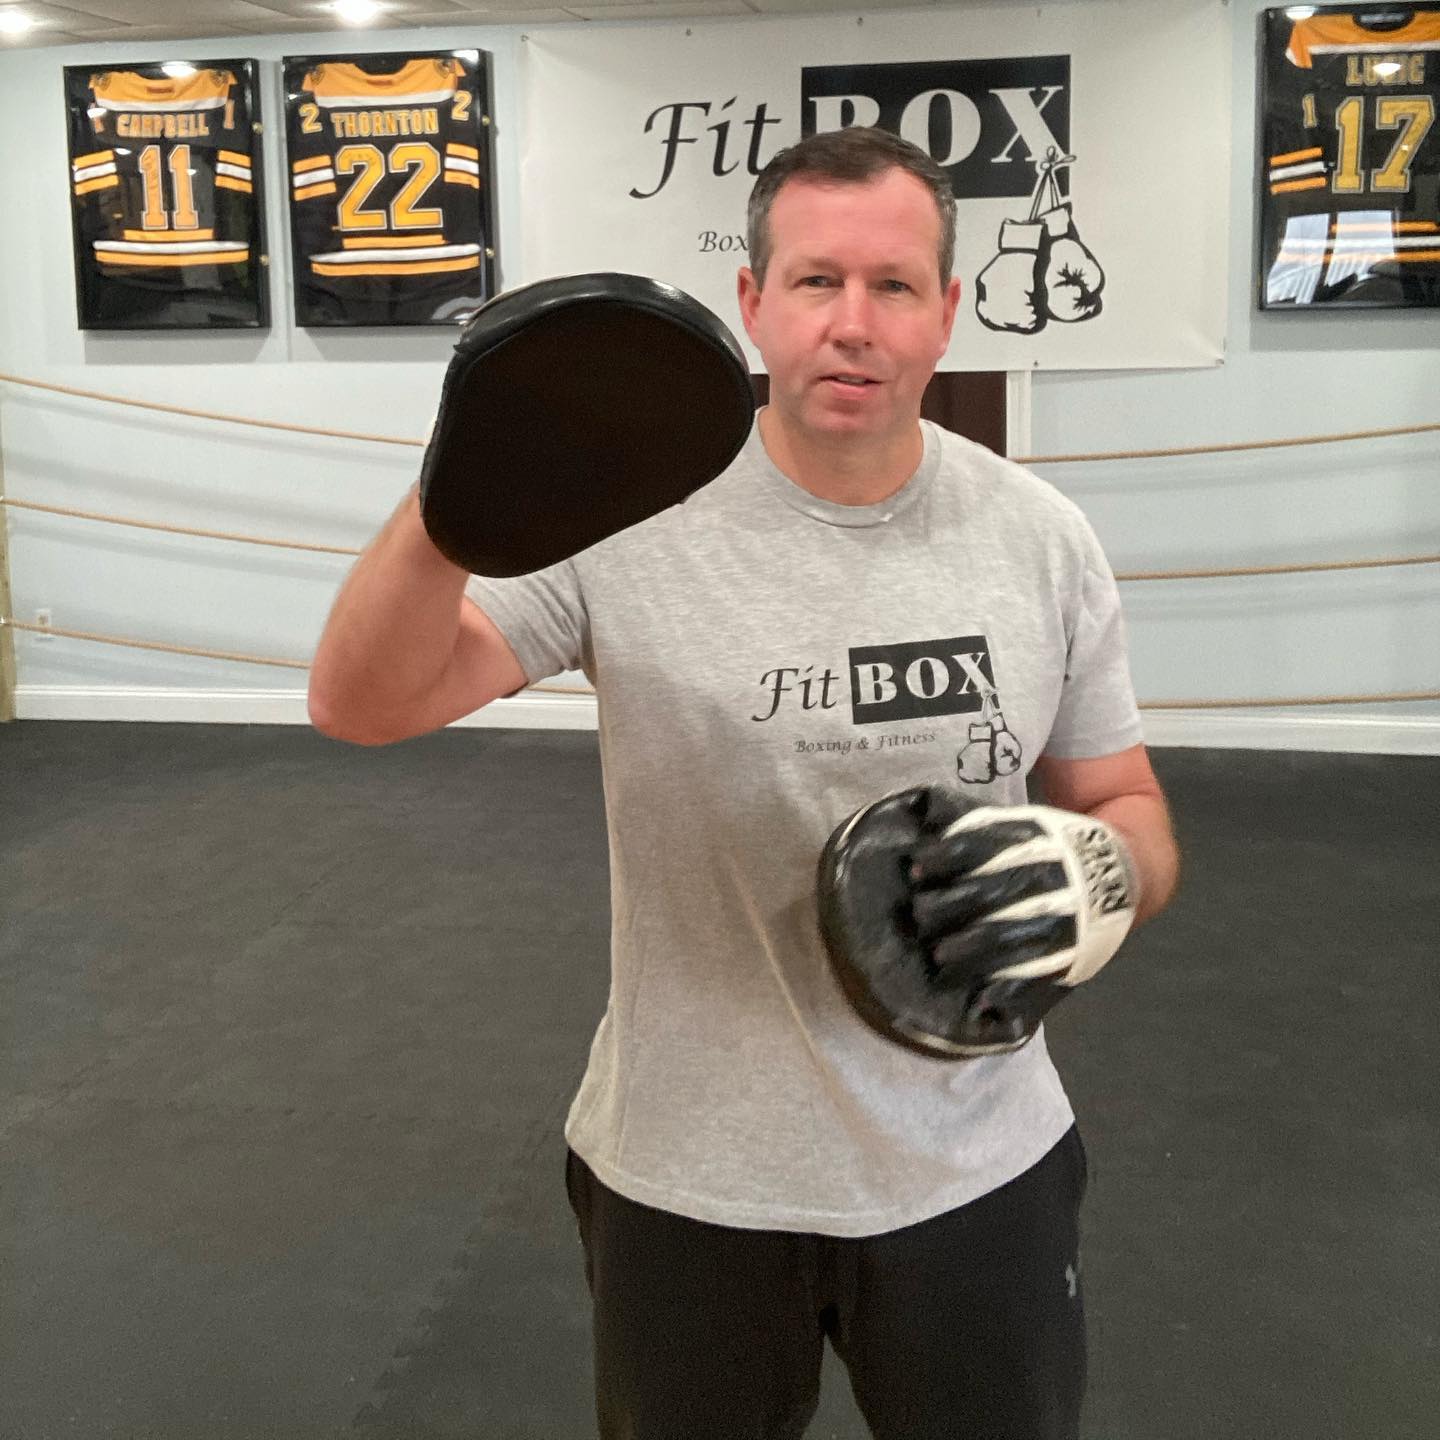 Schedule your private 1-on-1 boxing session with Boston’s well known boxing trainer to the Stars . Call/text (782)727-9503 or email fitbox@outlook.com.
.
 @nhlbruins www.Fitboxdedham.com @fitboxboxingfitness